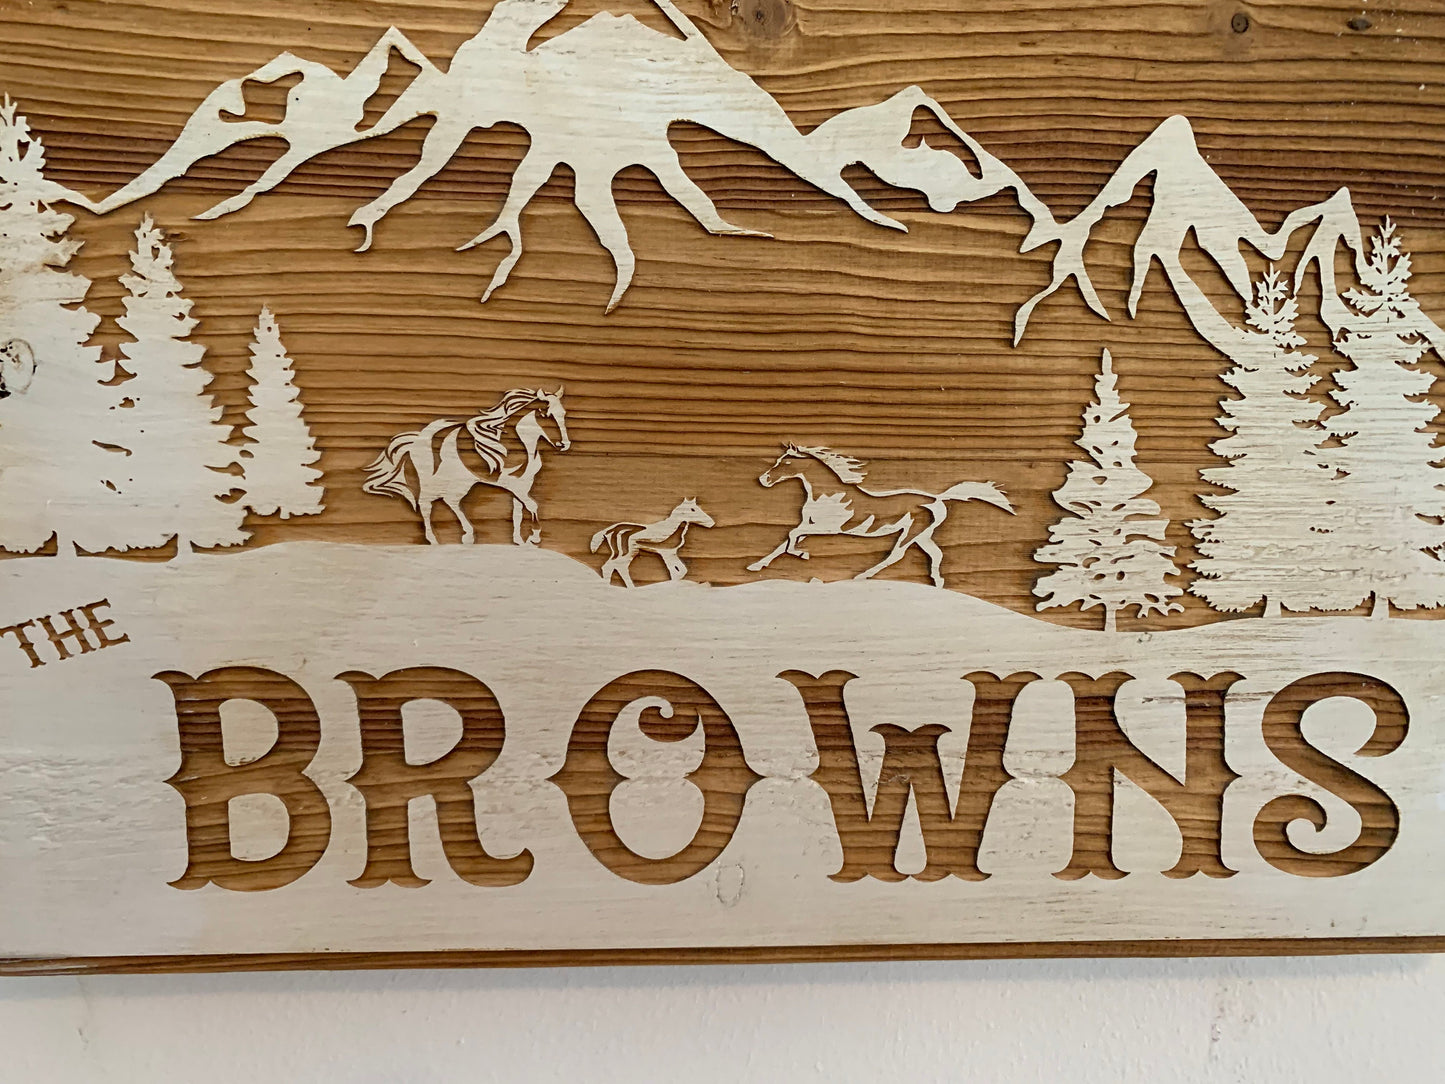 Wall Plaque, Mountain Scene, Horses, Painted Background,  Laser engraved on recycled pallet wood, personalized for you.